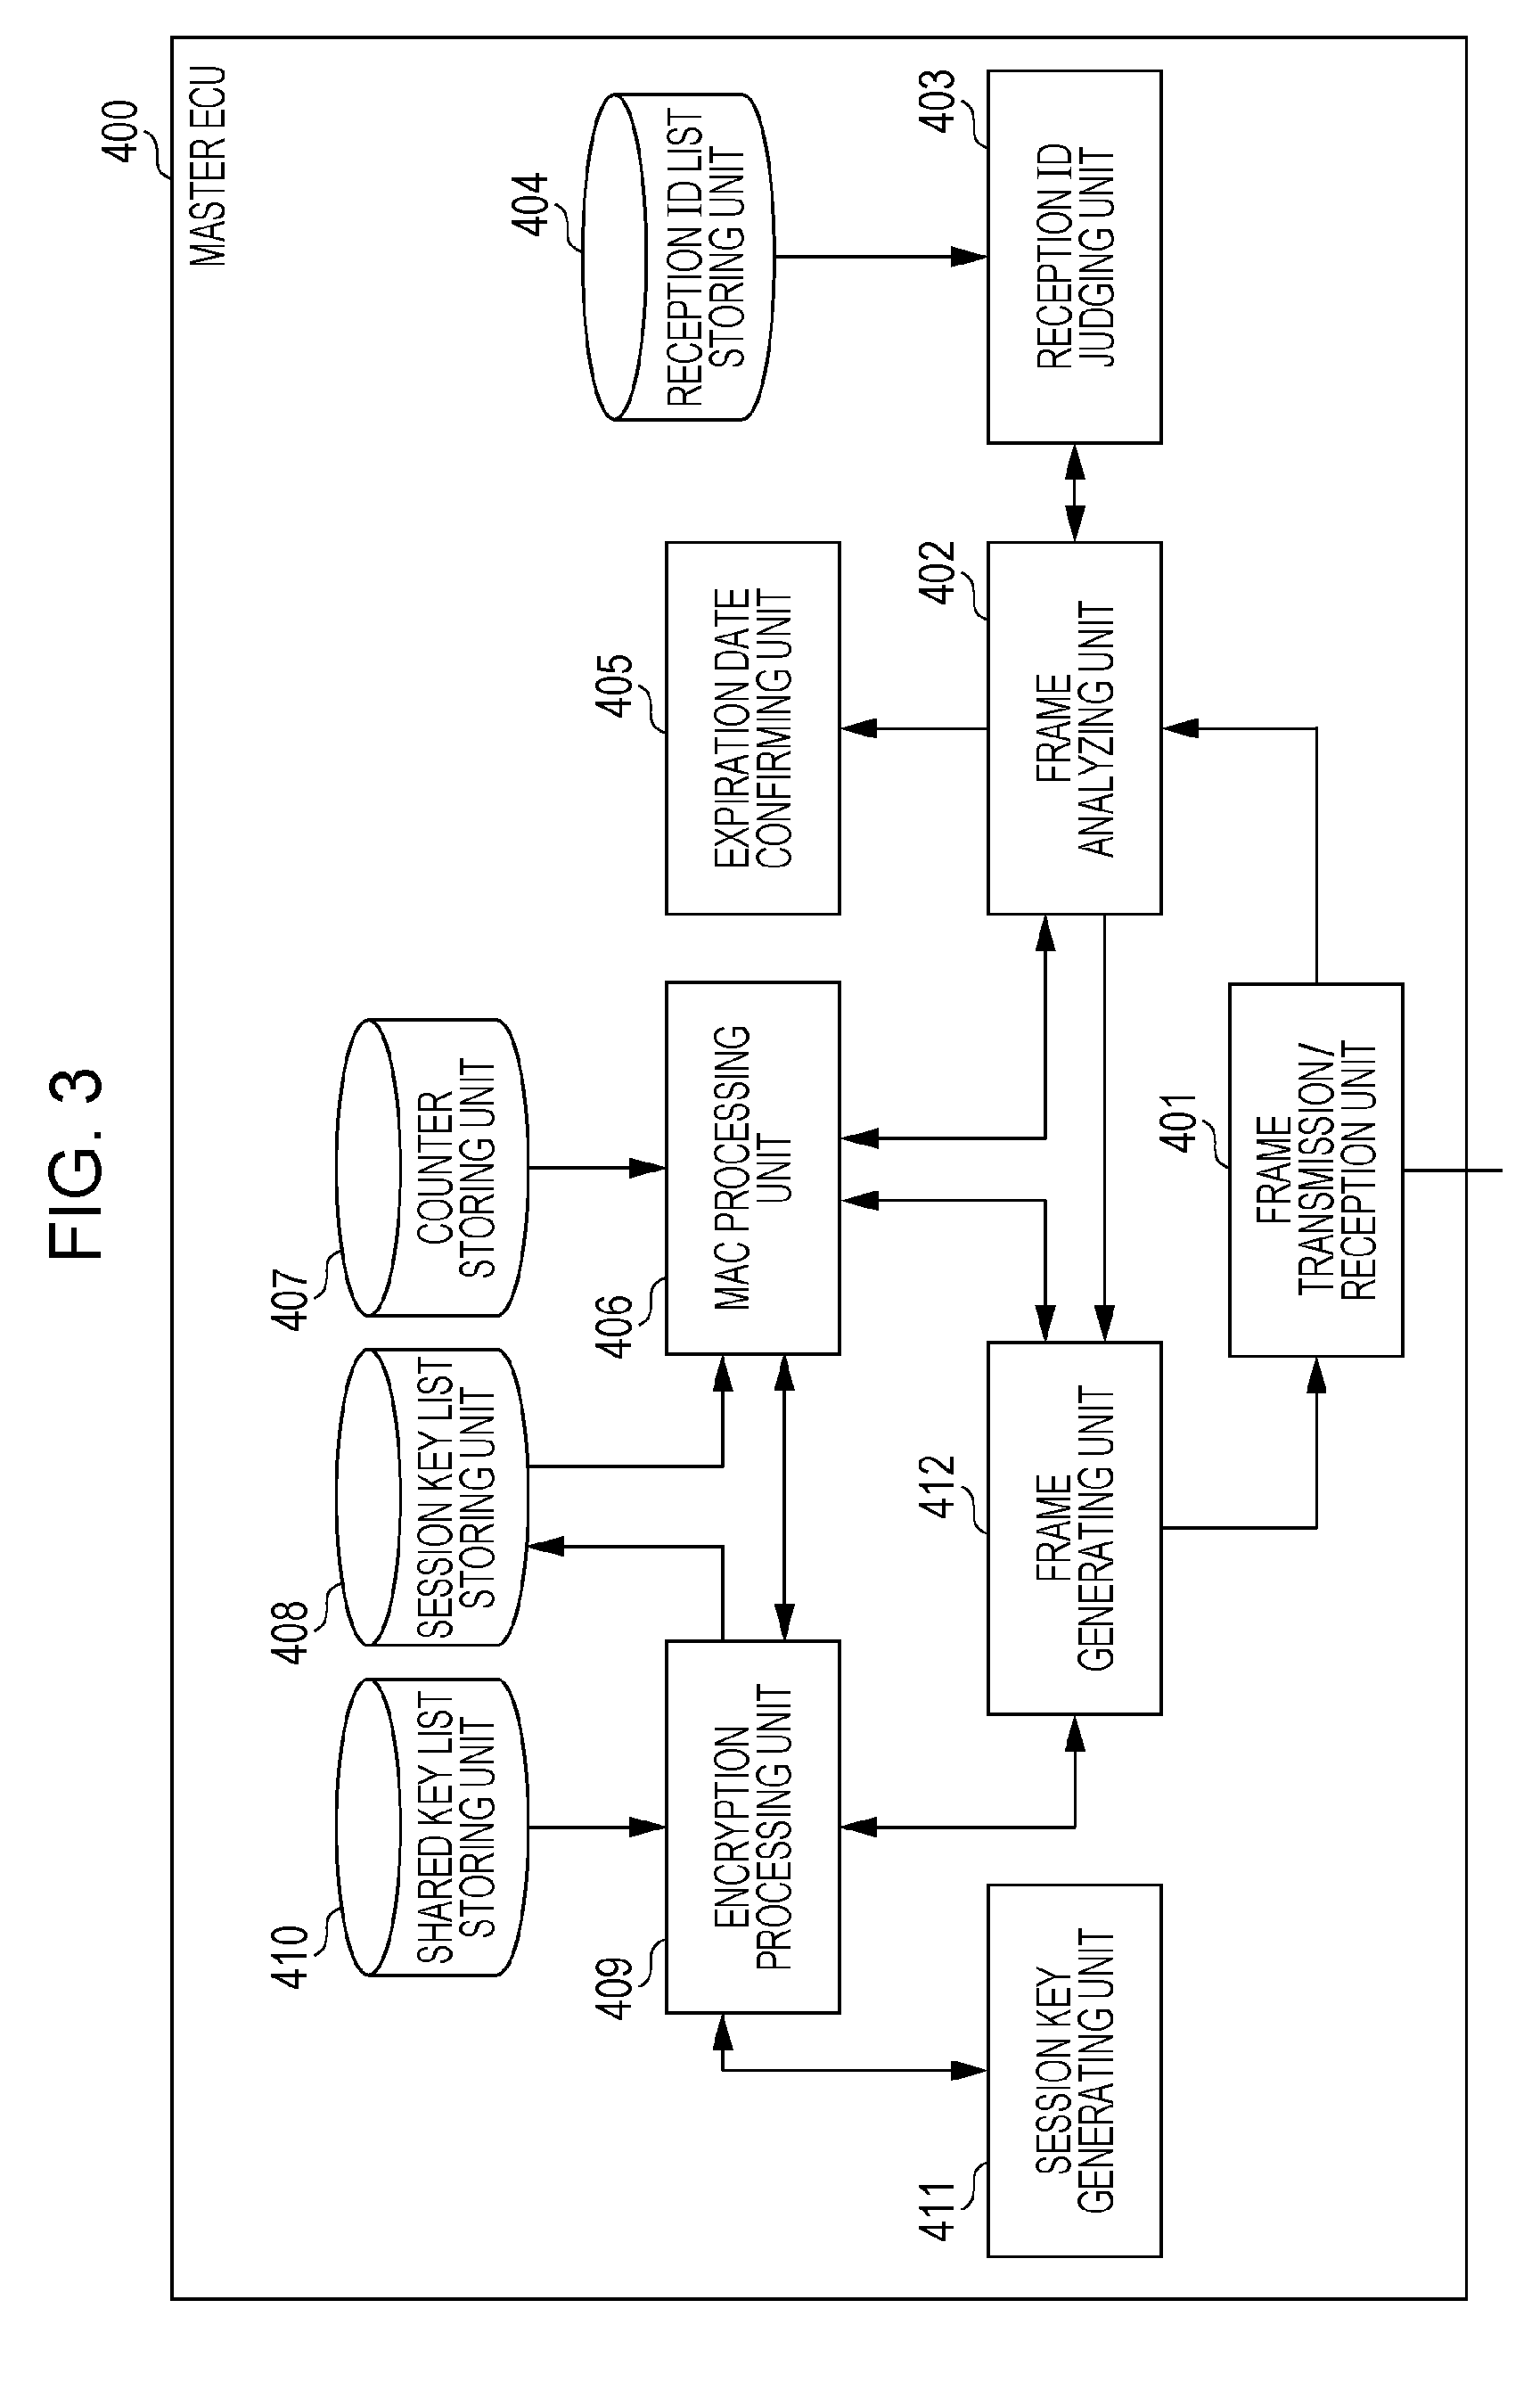 Key management method used in encryption processing for safely transmitting and receiving messages